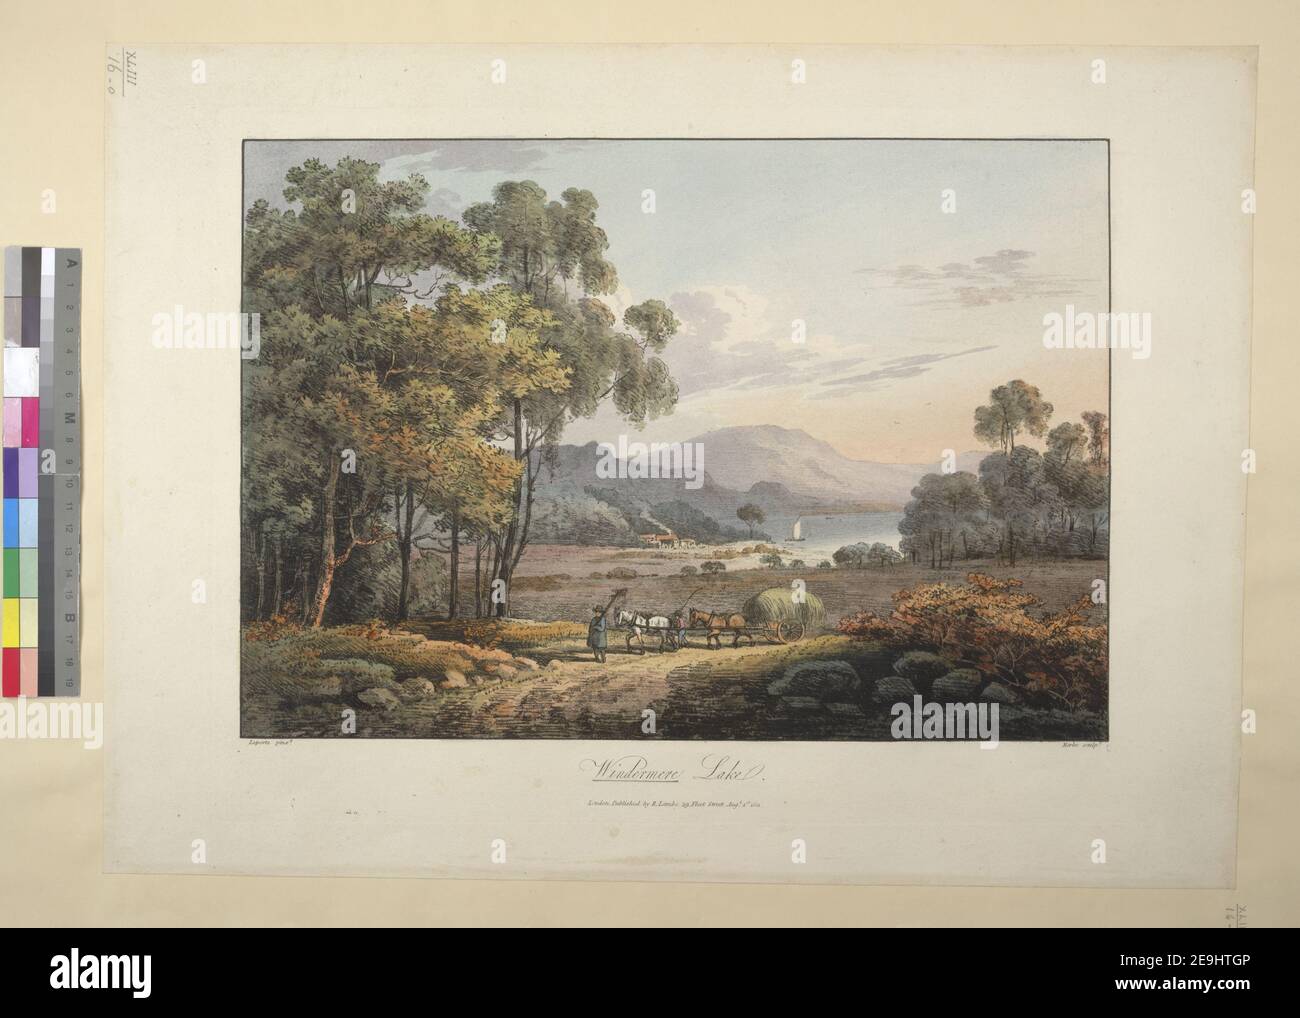 Windermere Lake.  Author  Merke, Henri 43.16.o. Place of publication: London Publisher: Published by R. Lambe 39 Fleet Street, Date of publication: Augt 1st 1811.  Item type: 1 print Medium: soft-ground etching with hand-colouring Dimensions: platemark 32.5 x 42.1 cm, on sheet 38.2 x 51.5 cm  Former owner: George III, King of Great Britain, 1738-1820 Stock Photo